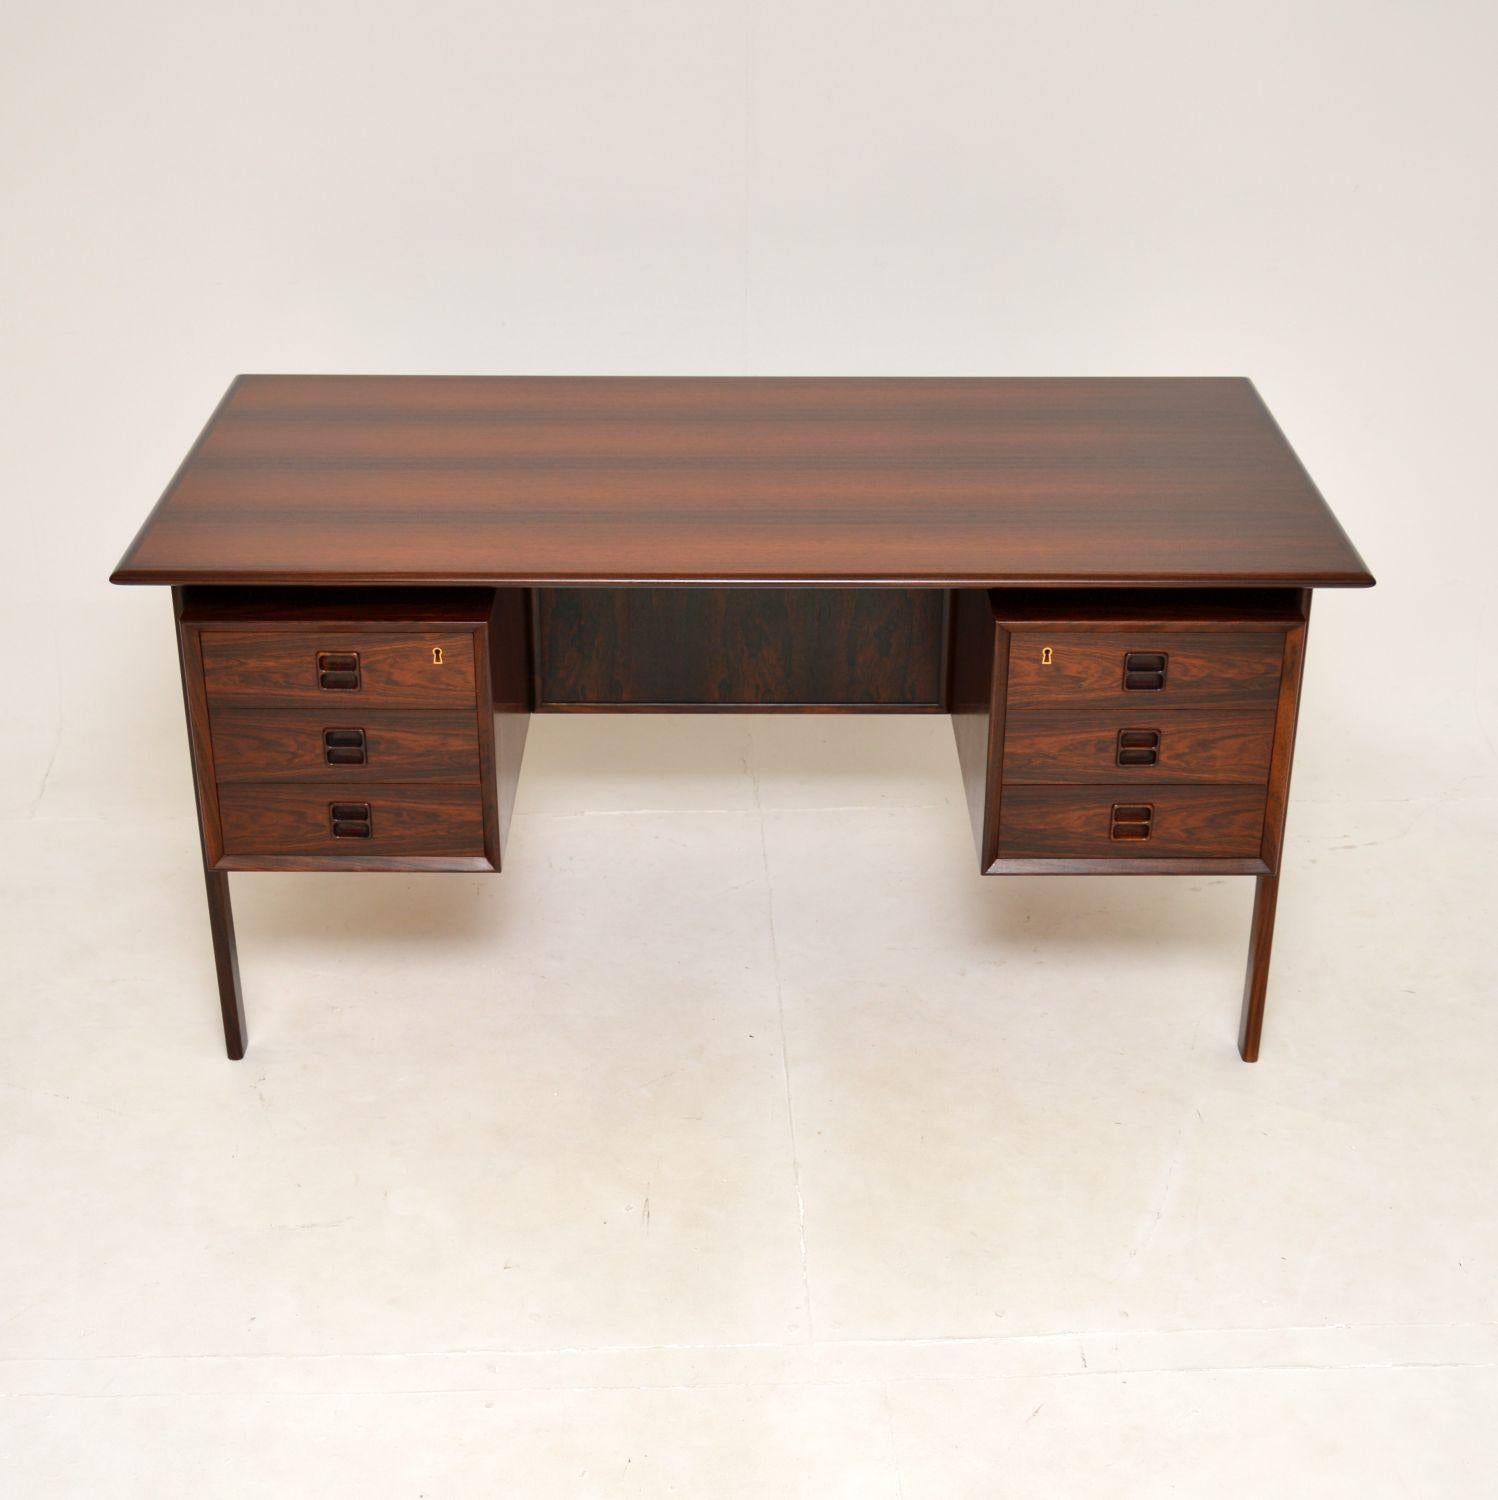 An exceptional Danish vintage desk. This was made by Brouer Mobelfabrik in Denmark, it dates from the 1960’s.

The quality is outstanding, this has a beautiful and very useful design. The colour tones and grain patterns are stunning, this is nicely